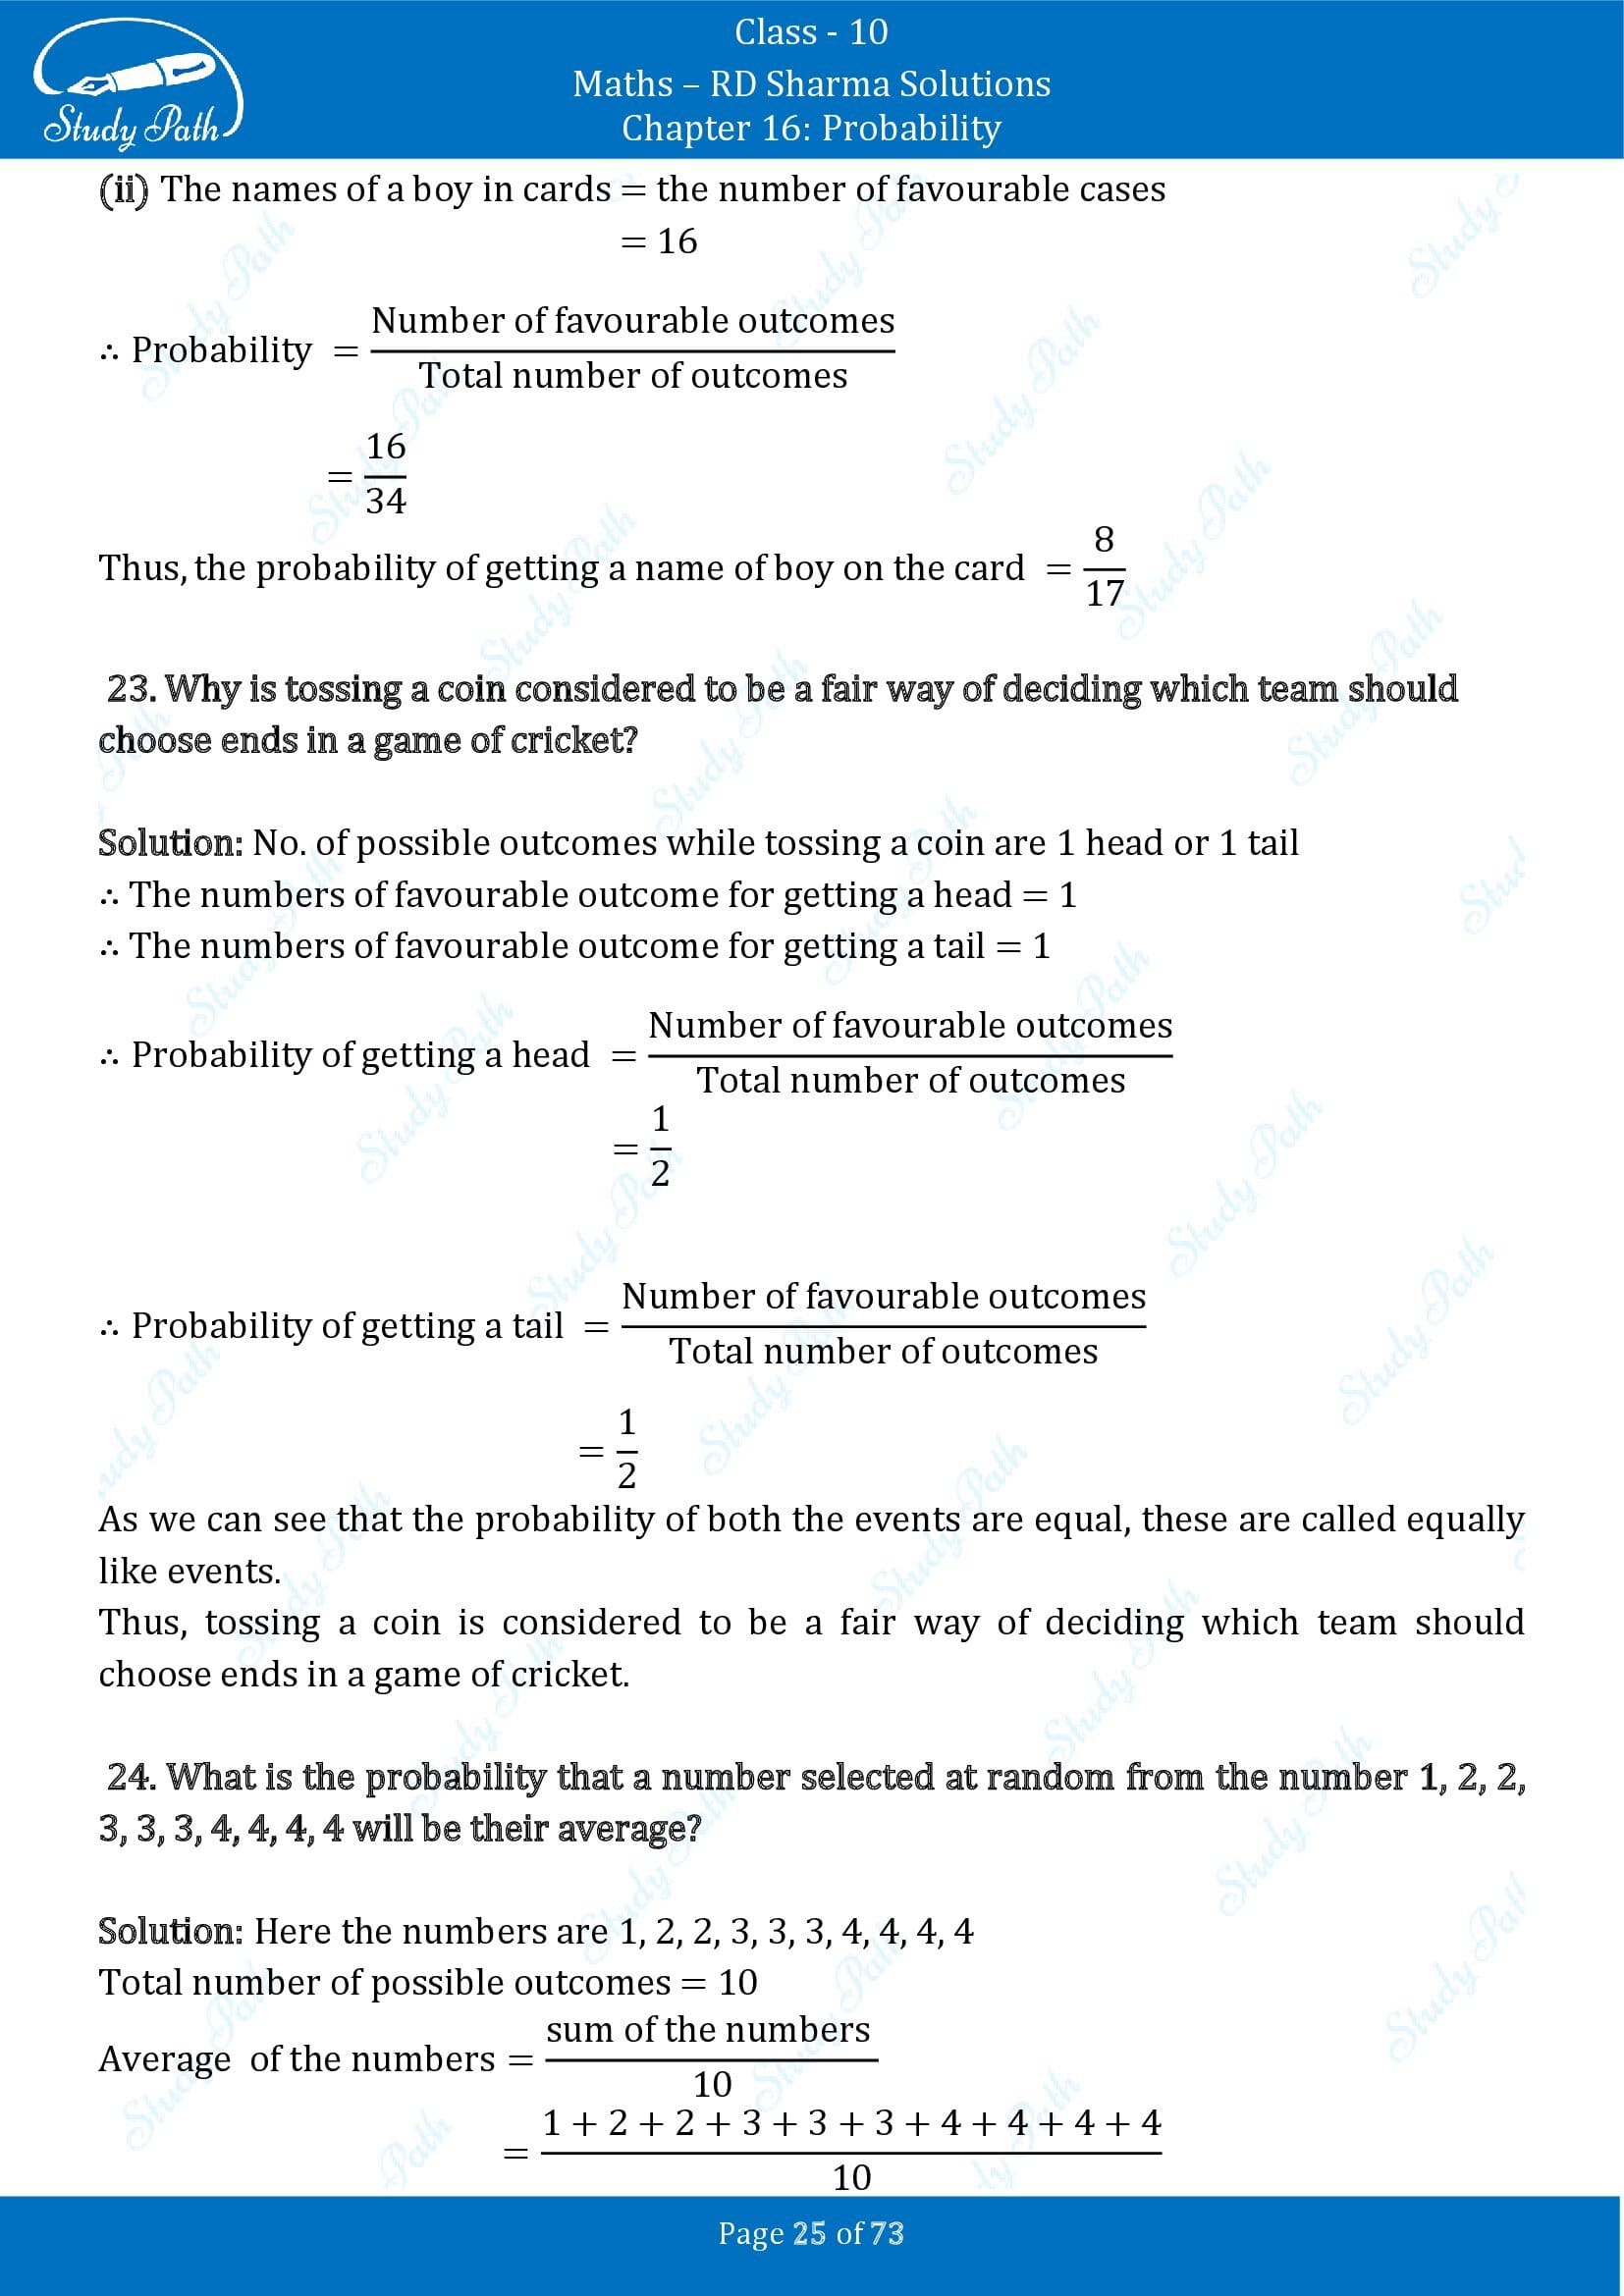 RD Sharma Solutions Class 10 Chapter 16 Probability Exercise 16.1 00025